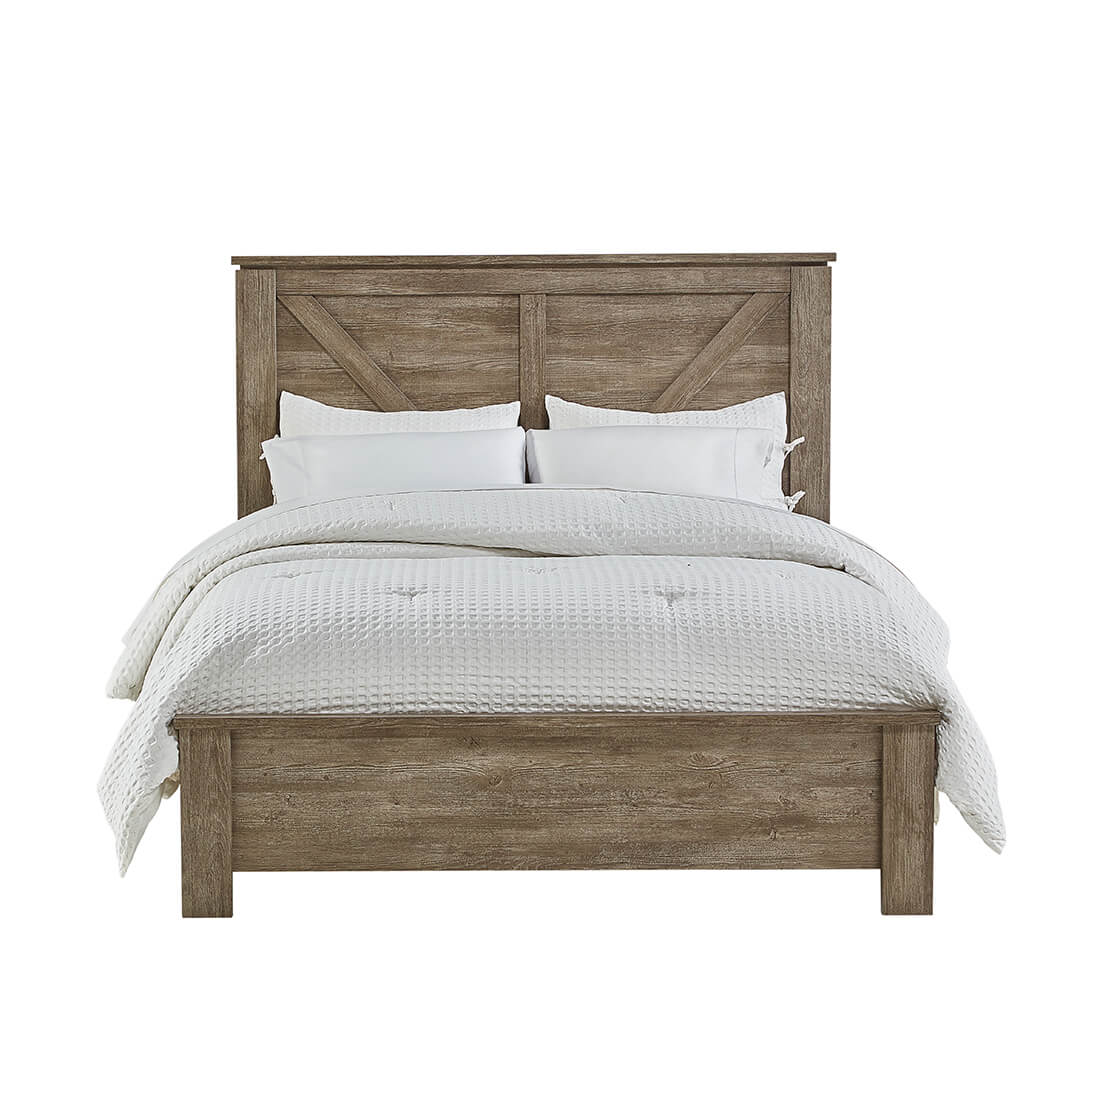 Adorna Collection Queen Bed Conn S, Do Bed Frames Matter